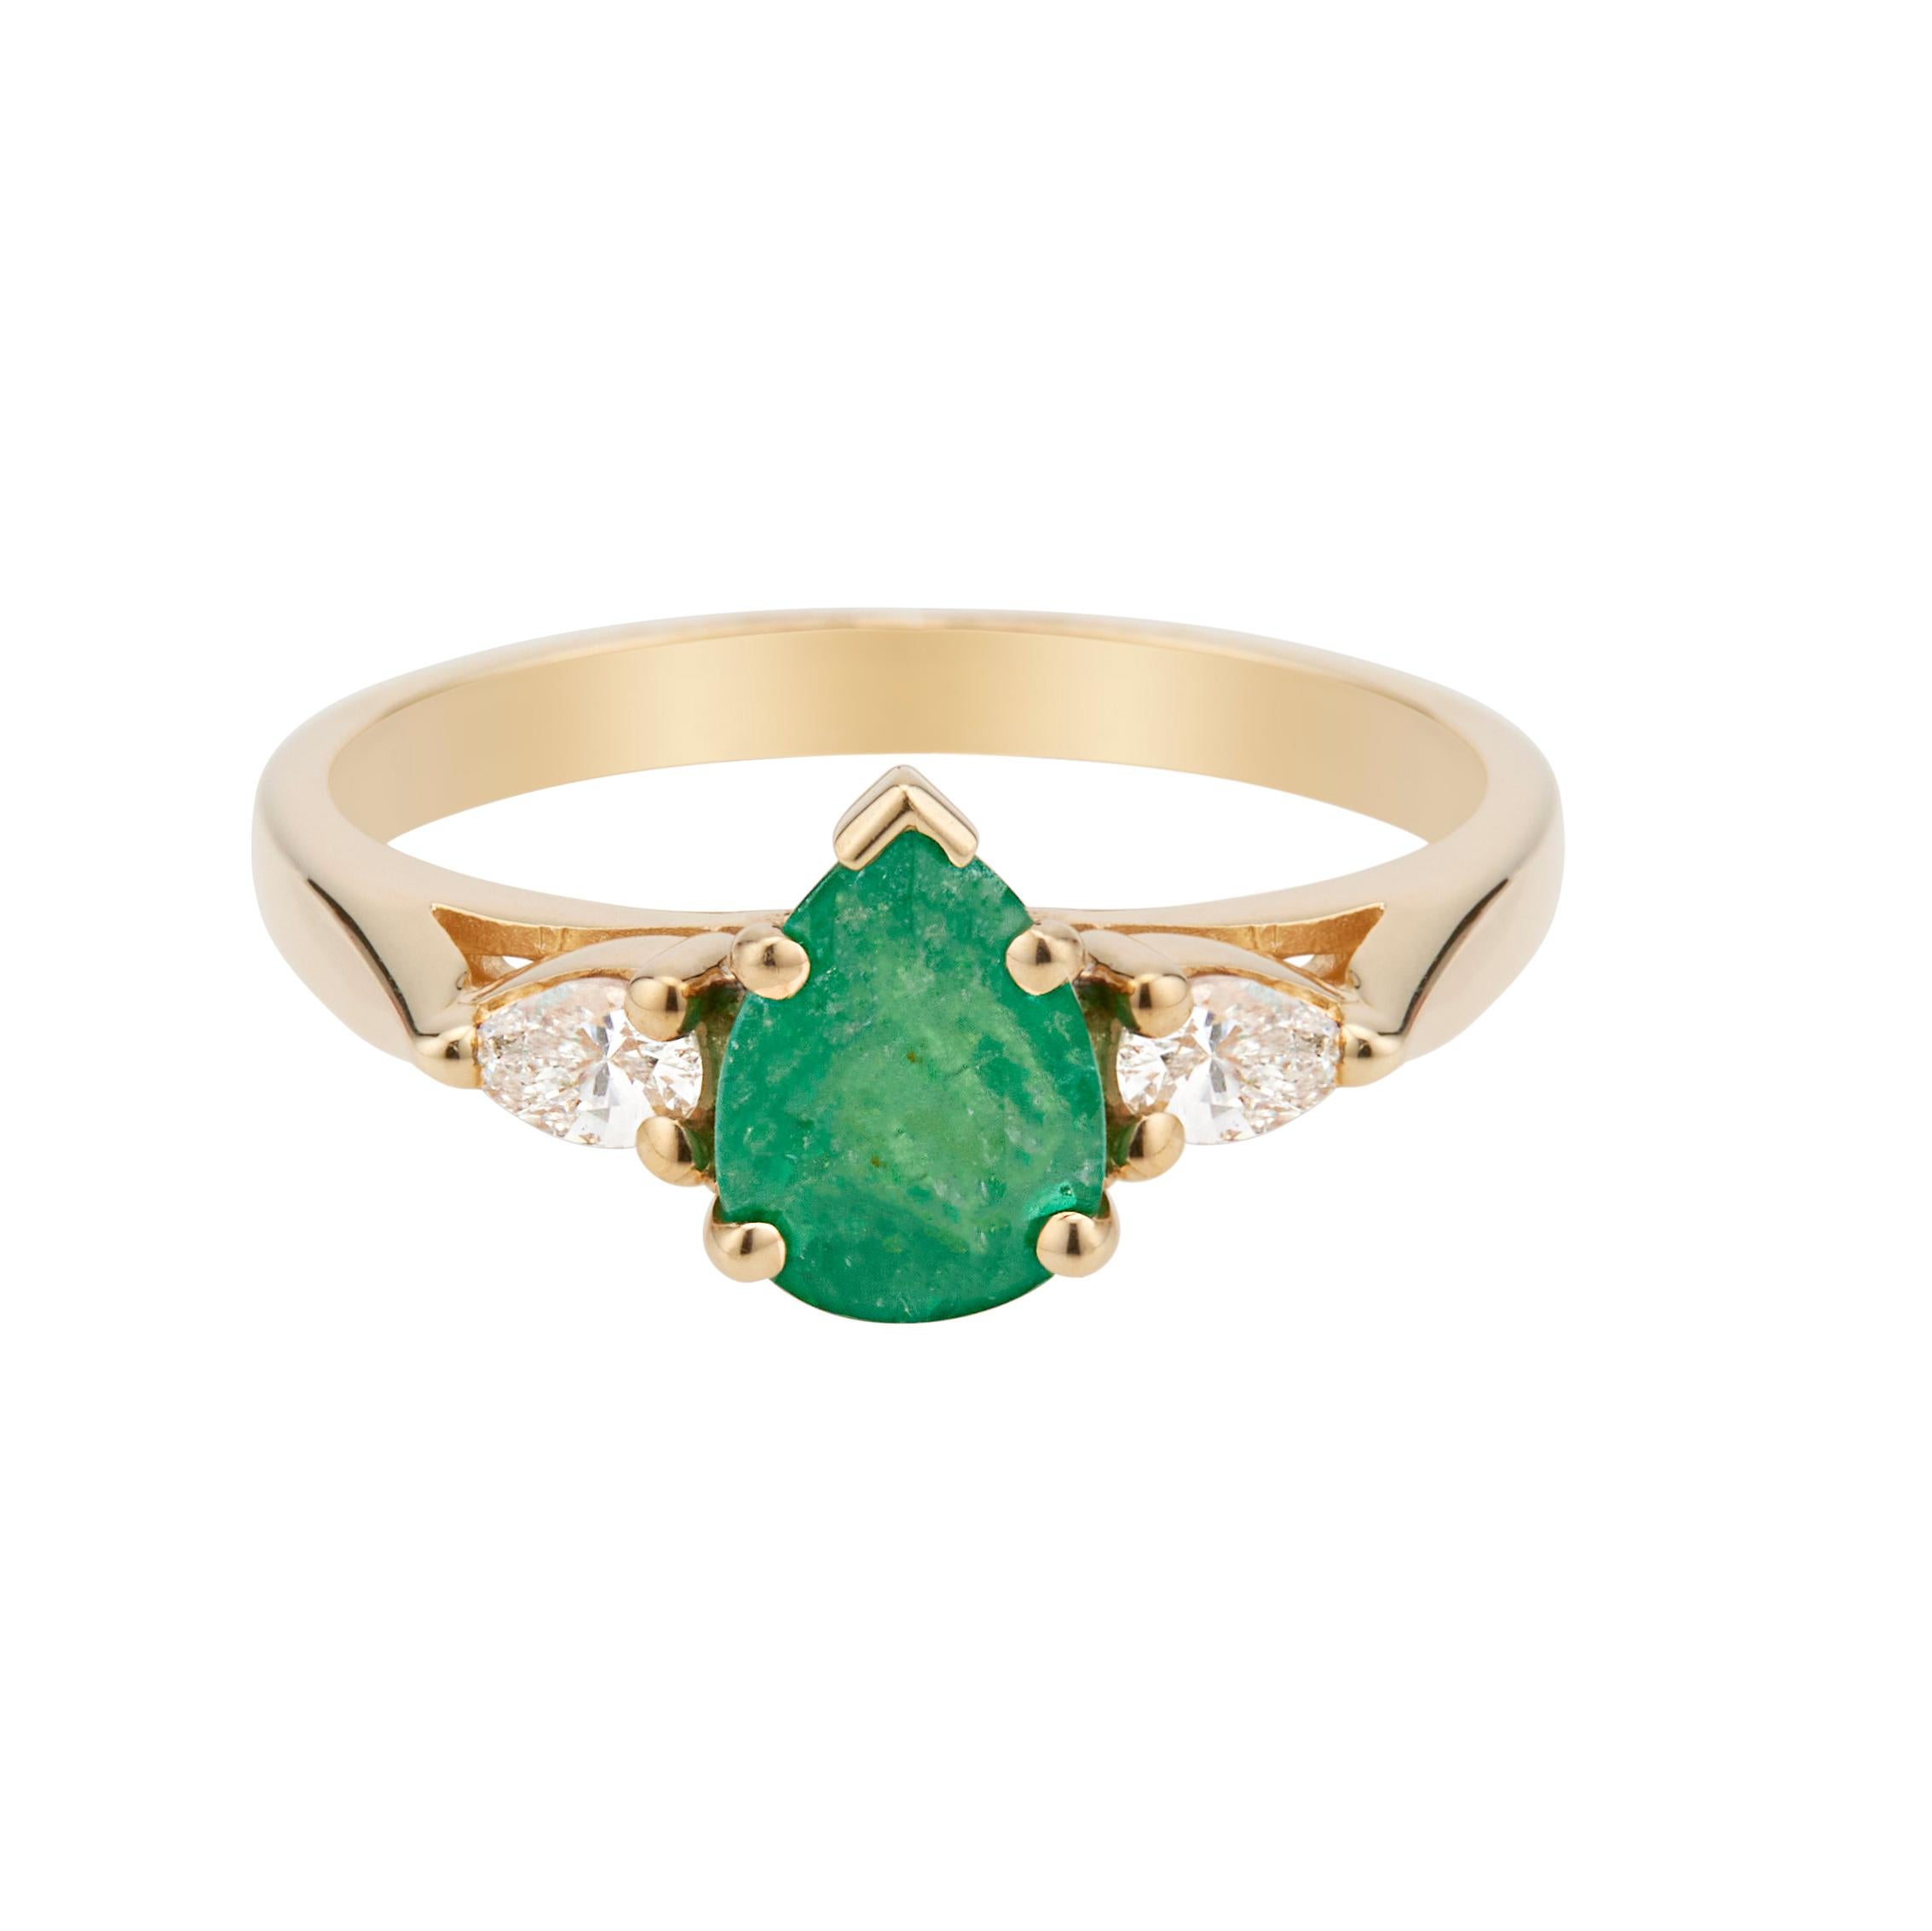 1960's Emerald and diamond engagement ring. GIA certified pear shaped emerald center stone in a 14k yellow gold three-stone setting with 2 pear shaped side diamonds.  

1 pear shaped green Emerald, approx. total weight .75cts, I, 8.0 x 5.84 x